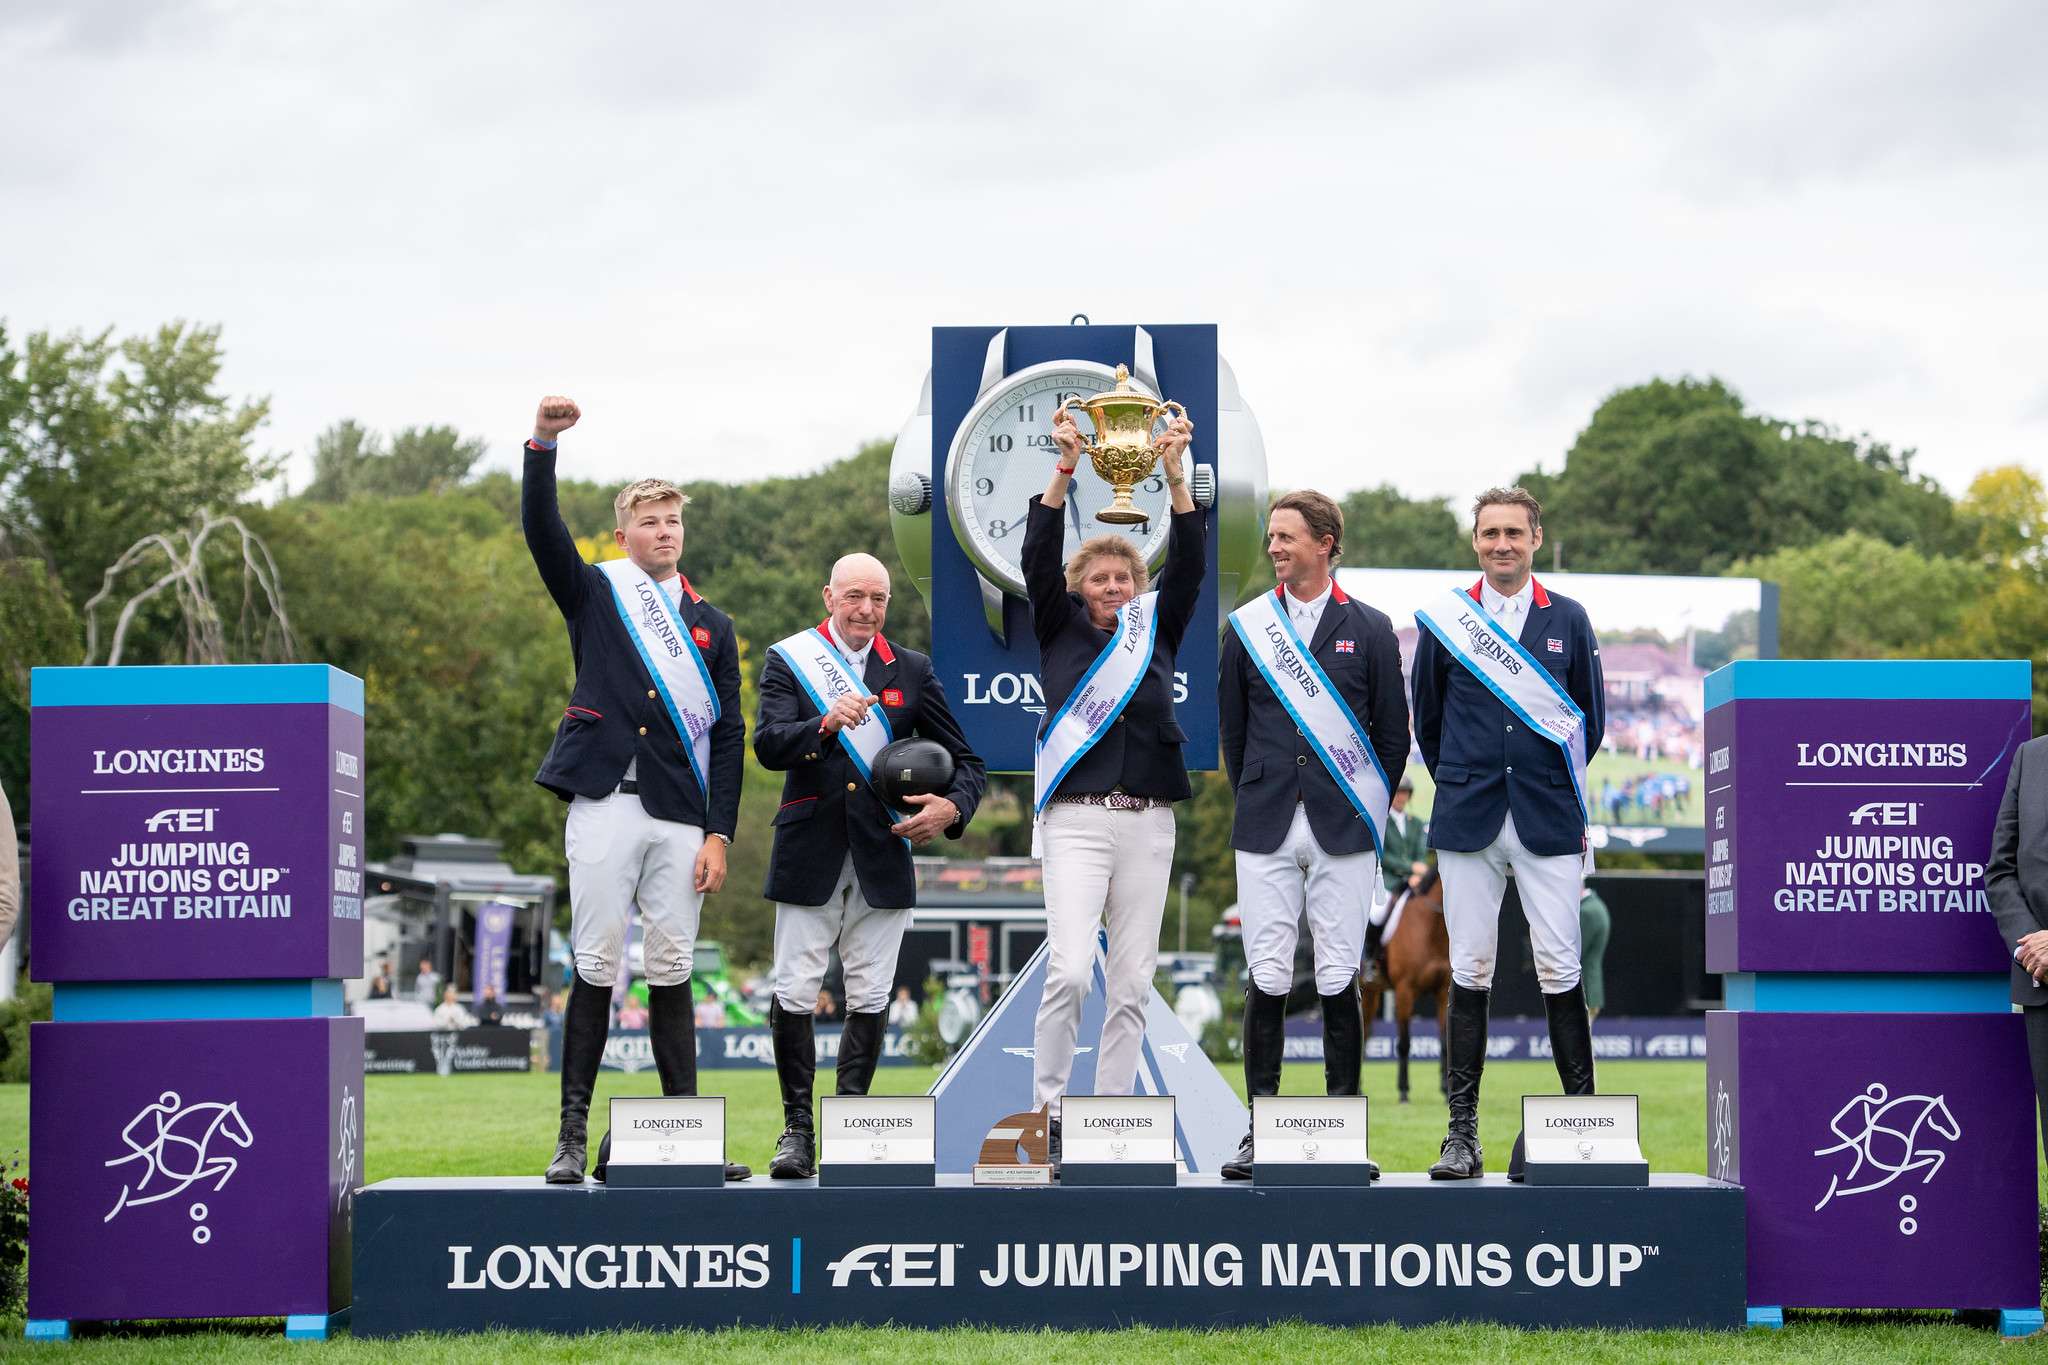 Long-awaited win for British at Hickstead